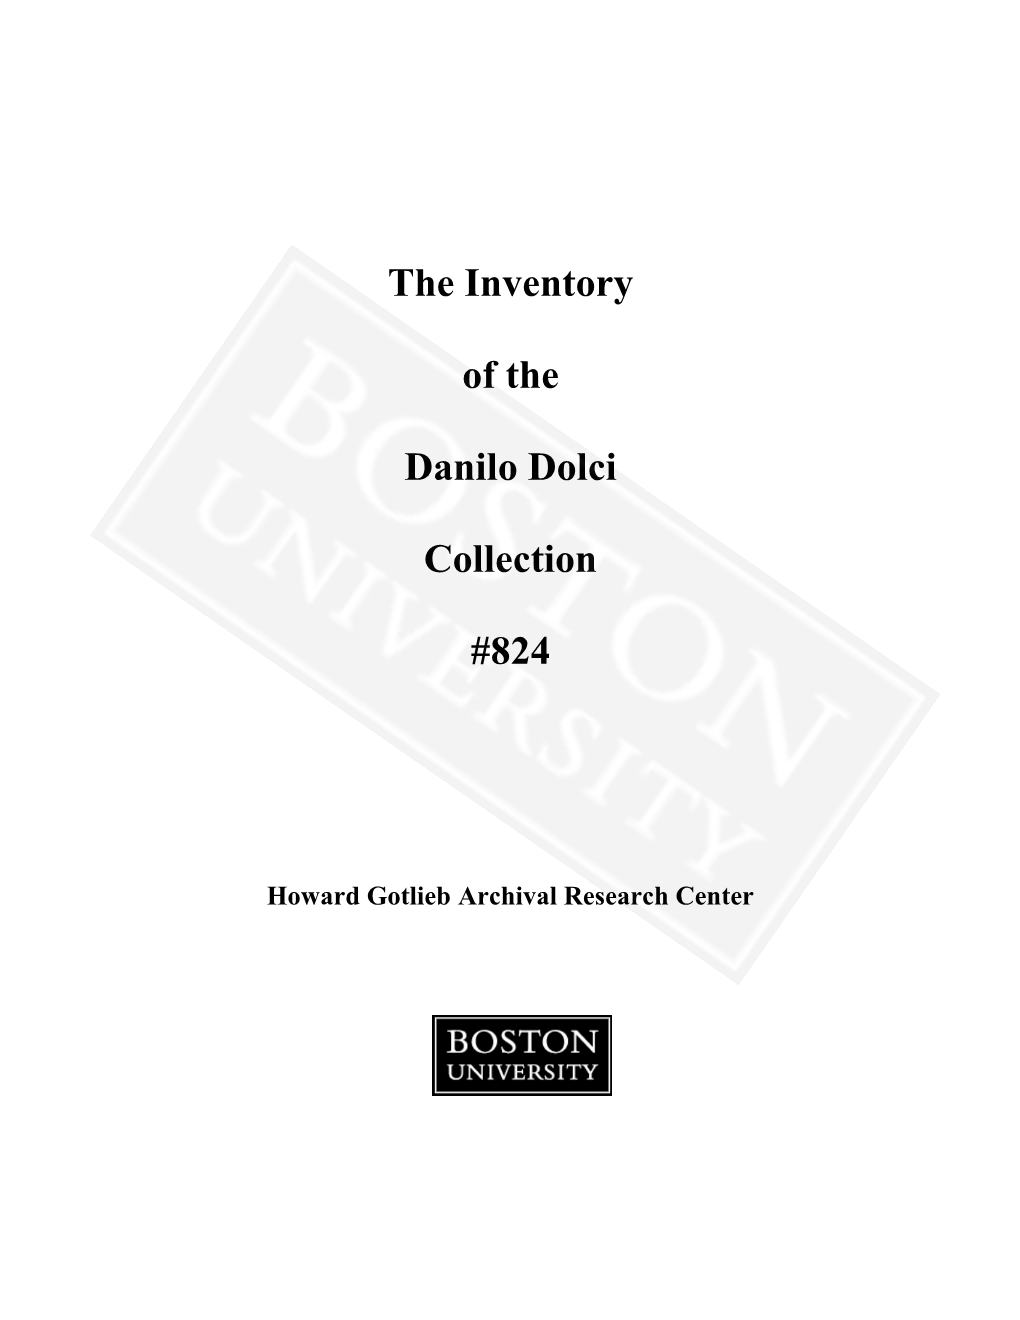 The Inventory of the Danilo Dolci Collection #824